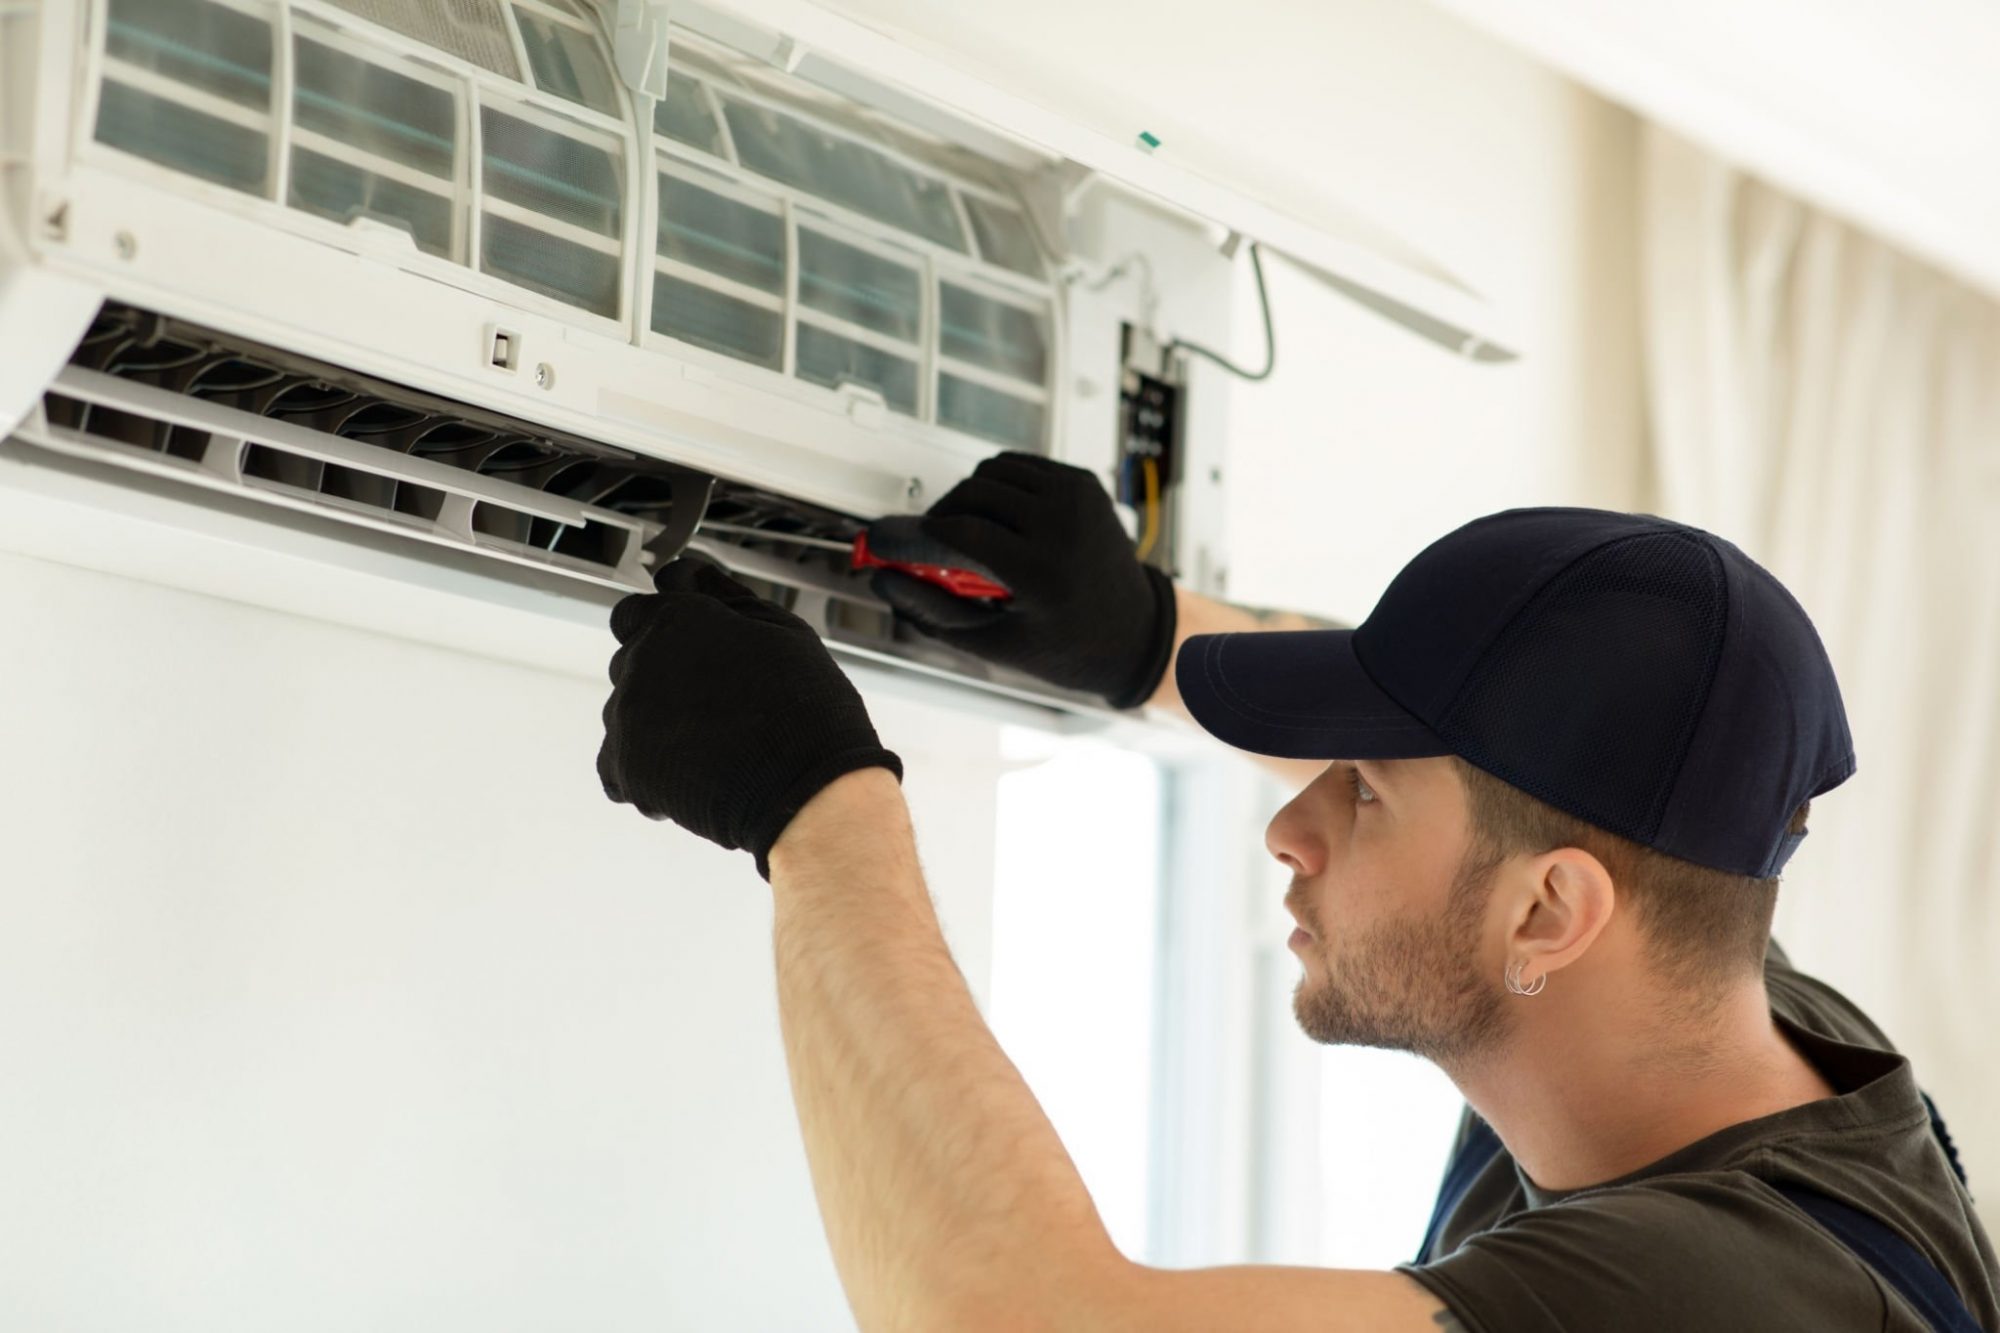 coral air conditioning spotlights common hvac problems